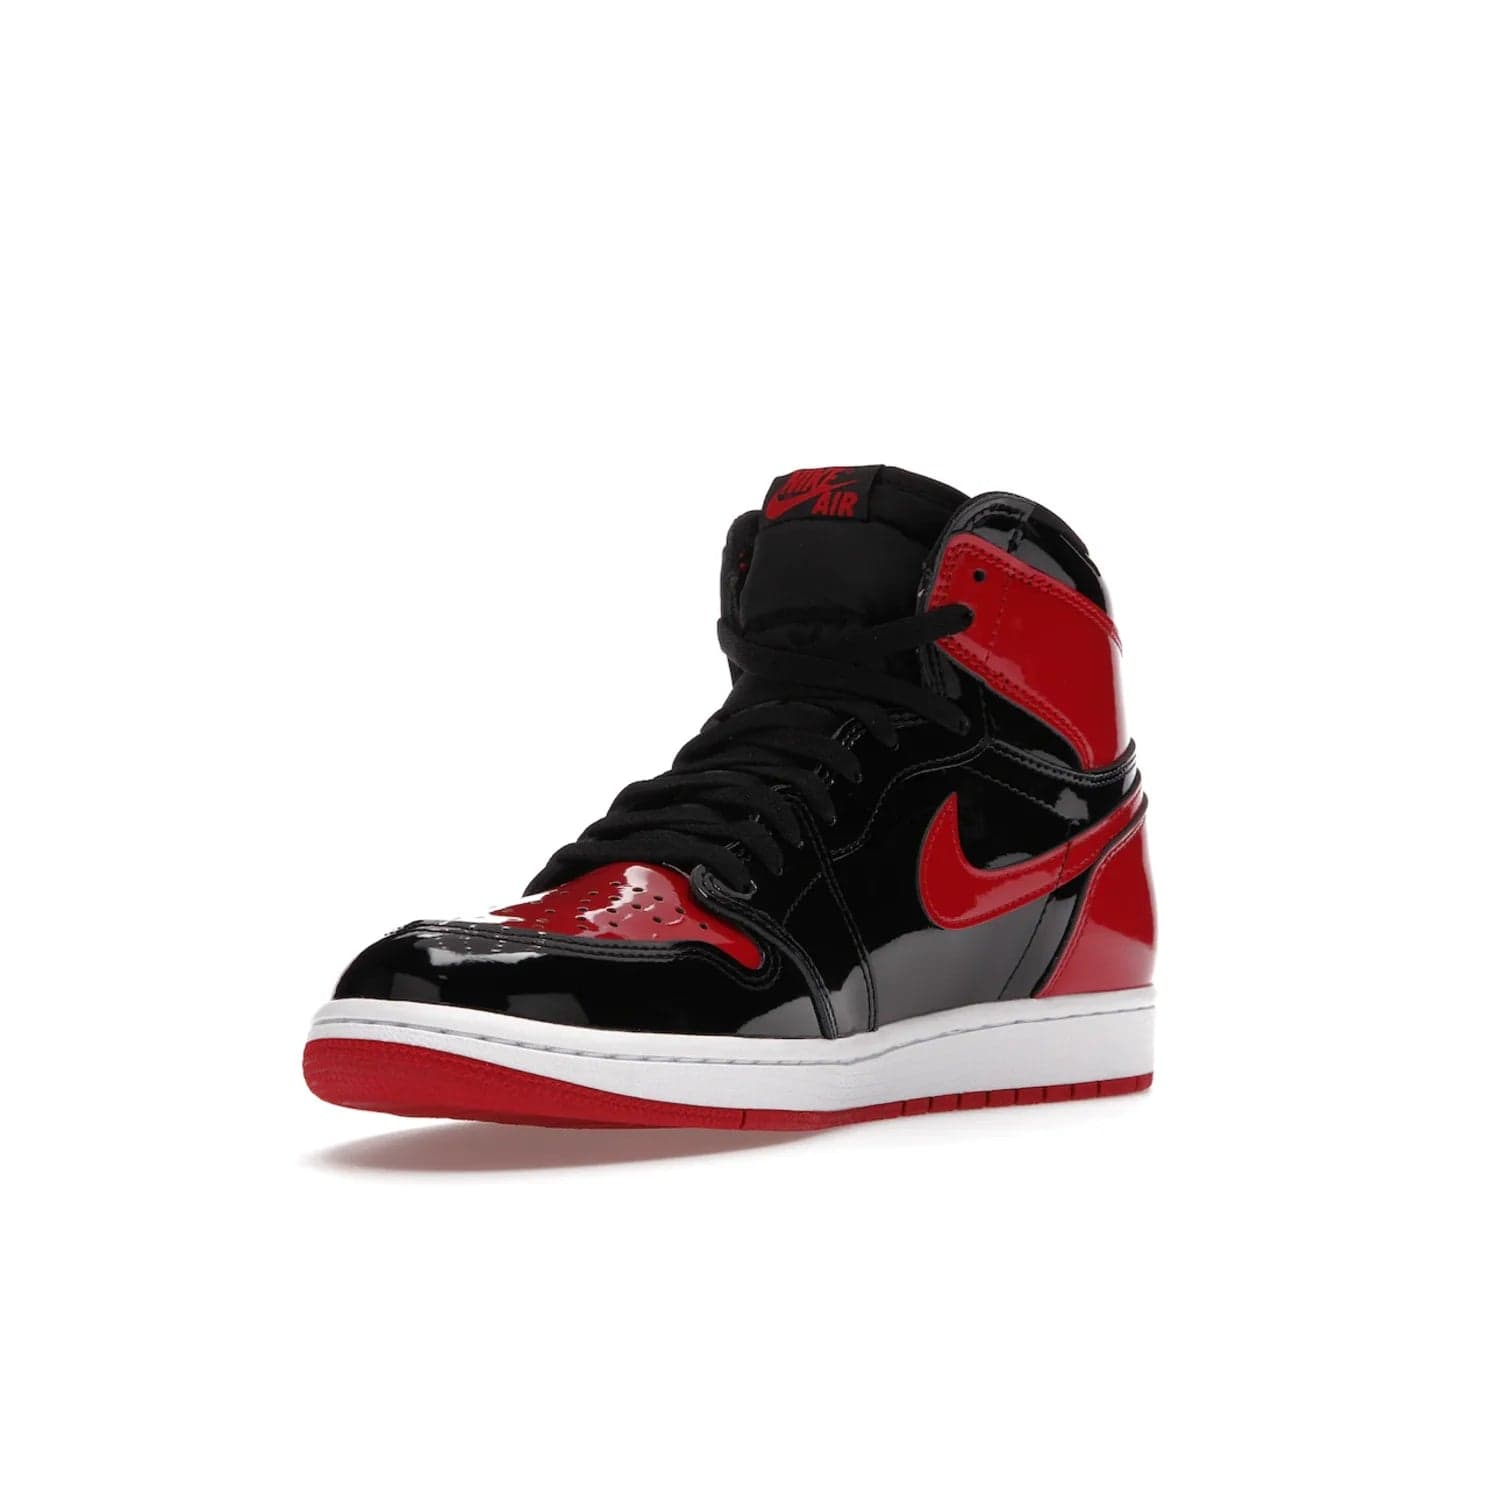 Jordan 1 Retro High OG Patent Bred - Image 14 - Only at www.BallersClubKickz.com - Introducing Air Jordan 1 Retro High OG Patent Bred - sleek patent leather upper, signature weaved Nike Air tongue and classic Wings logo on collar. Red and white sole complete signature look. Releasing December 2021 - perfect retro edition for holidays.